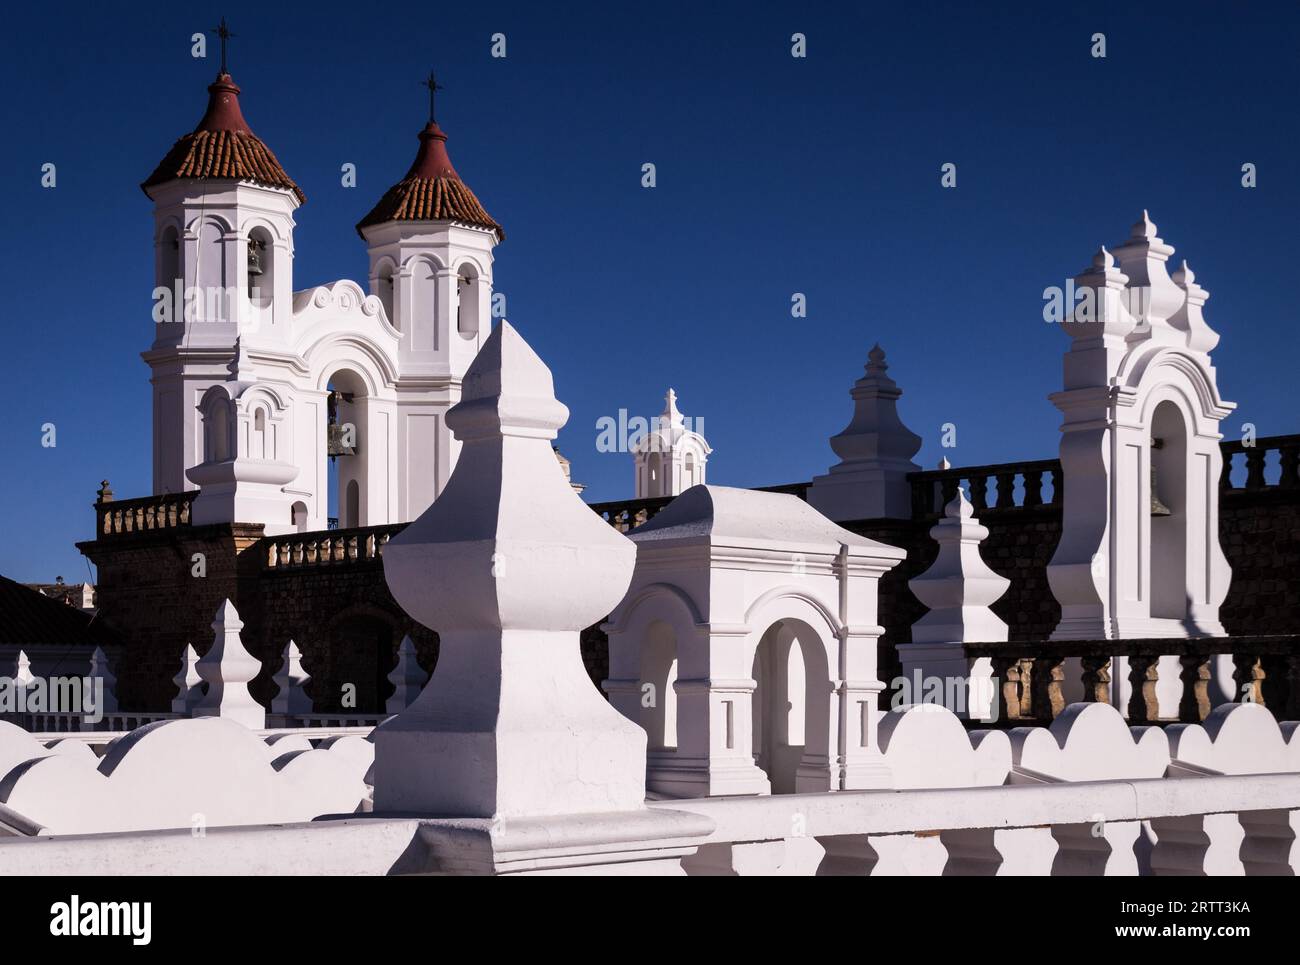 Rooftop view of San Felipe Neri monastery in Sucre, Bolivia. Bolivia's capital is famous for its colonial architecture Stock Photo